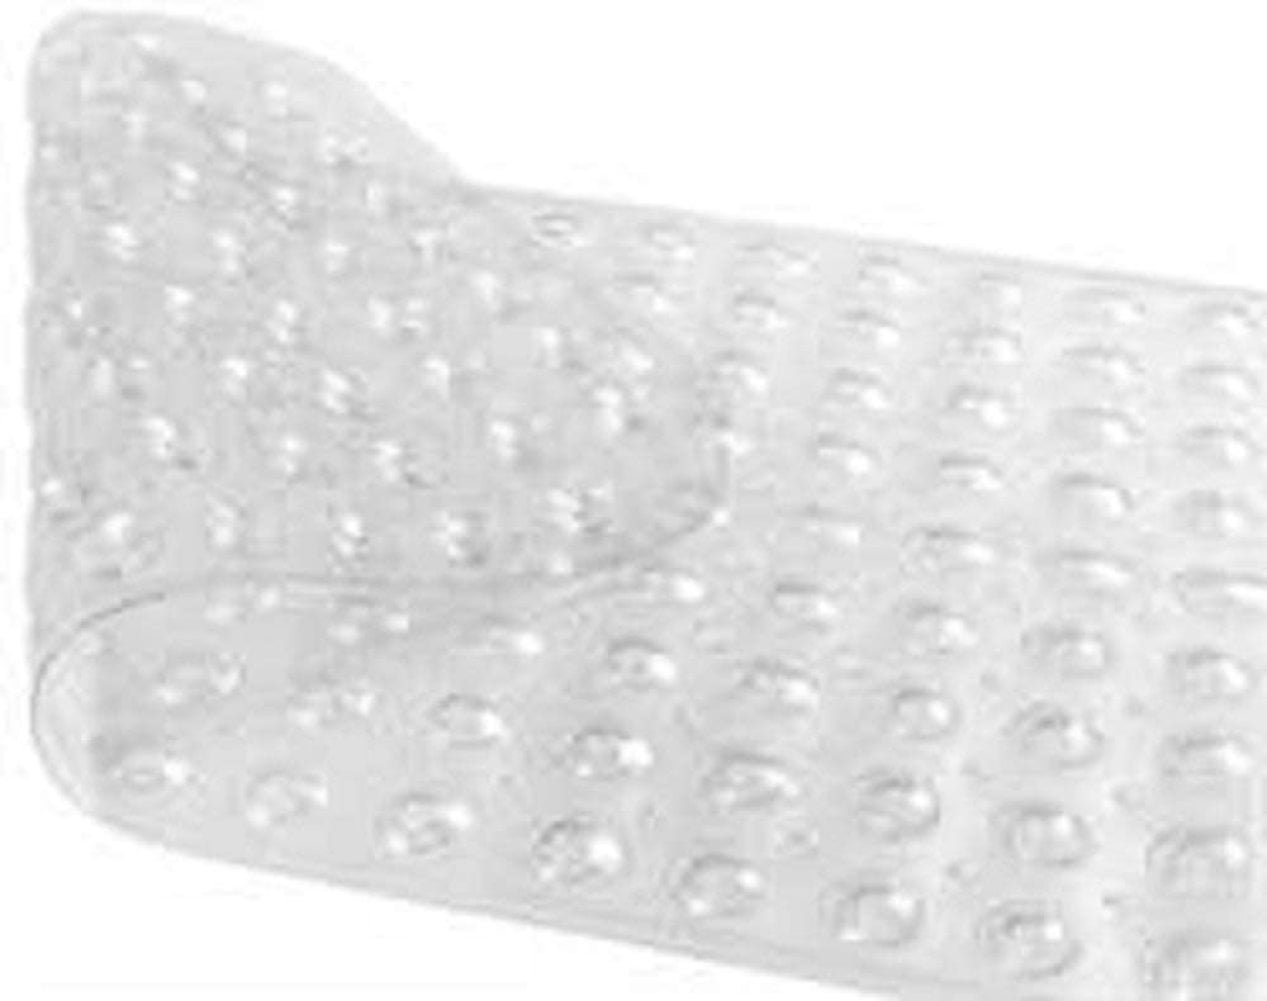 White No Suction Cup Designed For And " The Bathtub Mats Original Refinished 